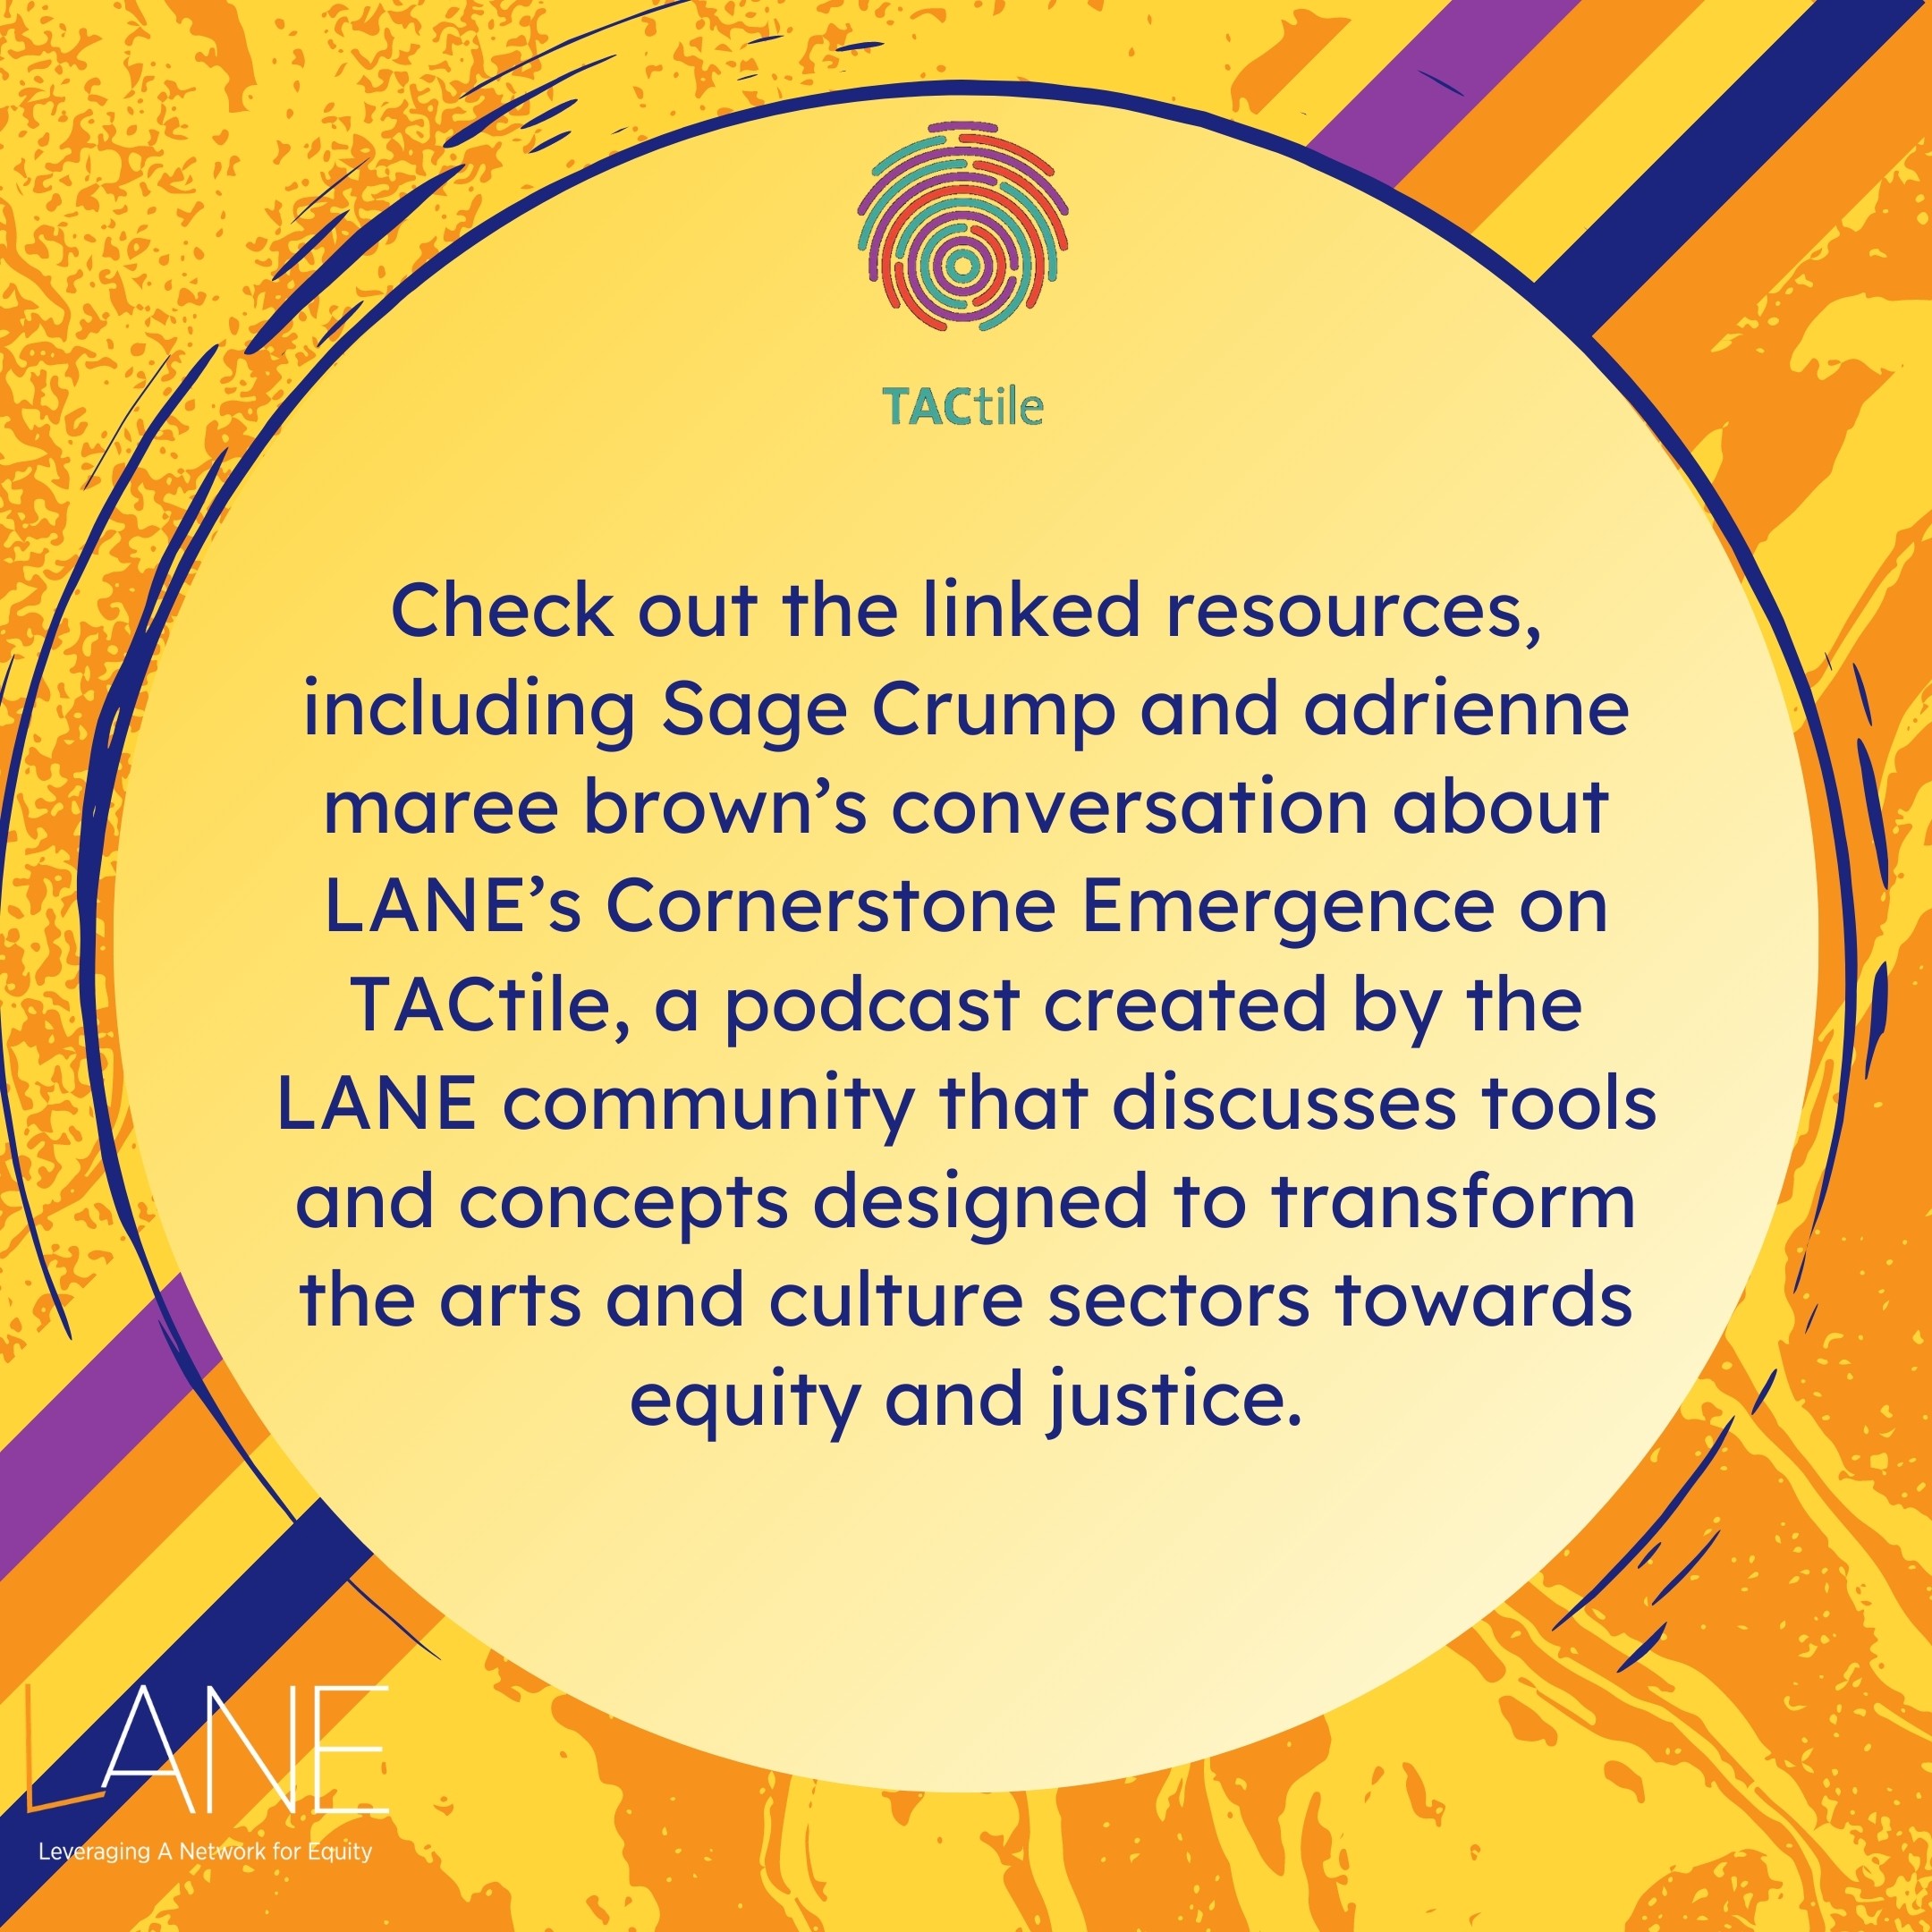 Check out the linked resources, including Sage Crump and adrienne maree brown’s conversation about LANE’s Cornerstone Emergence on TACtile, a podcast created by the LANE community that discusses tools and concepts designed to transform the arts and culture sectors towards equity and justice.